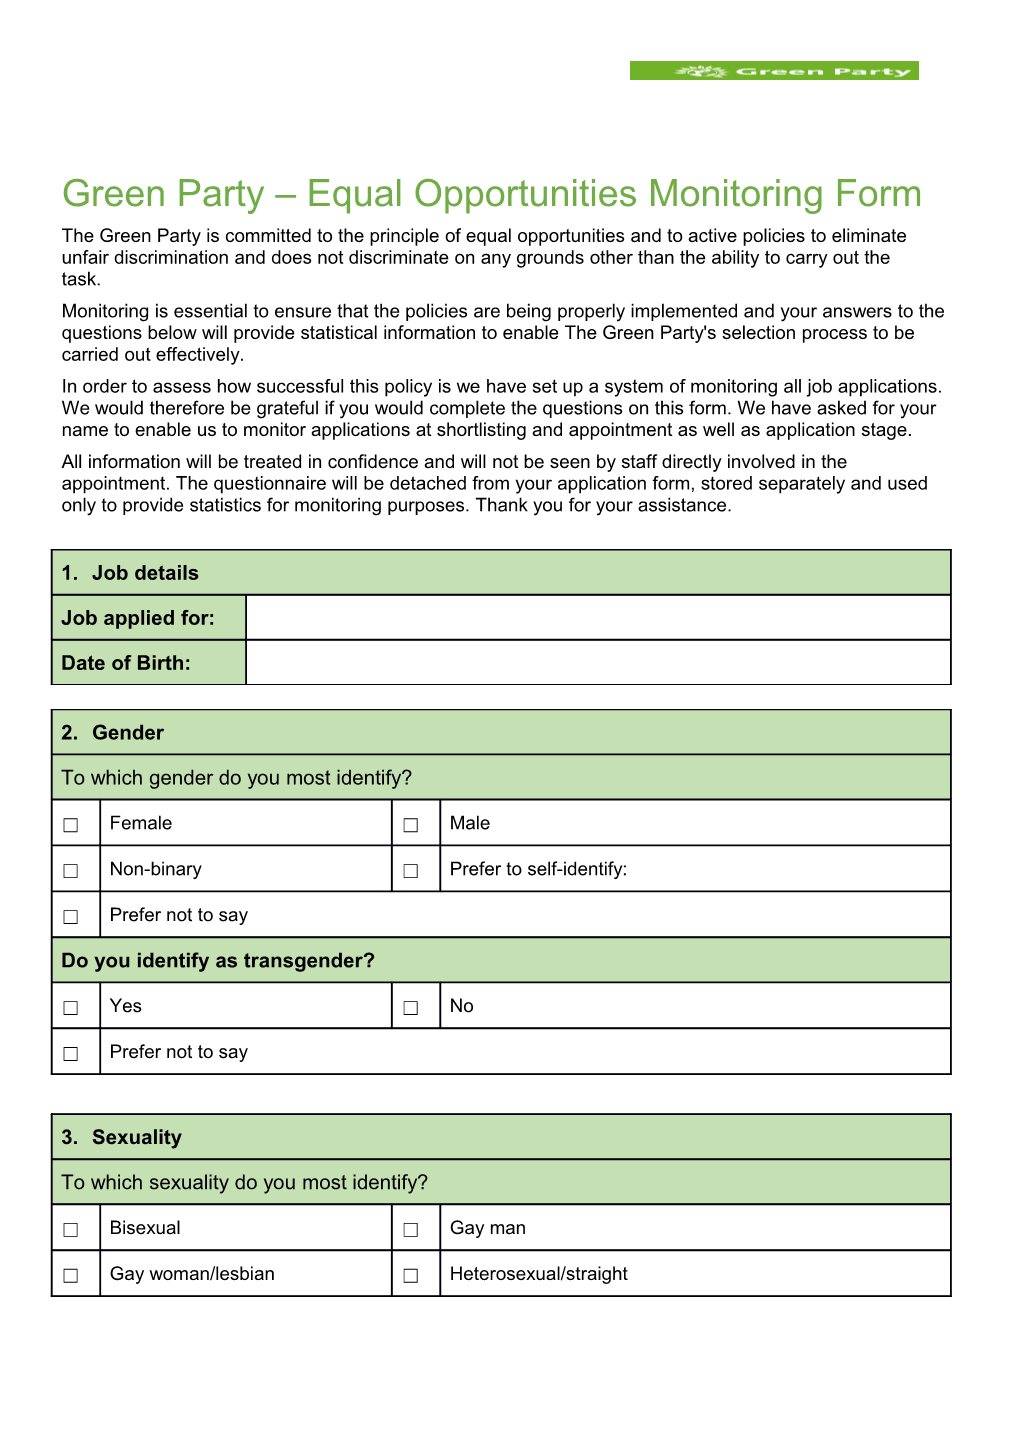 Green Party Equal Opportunities Monitoring Form